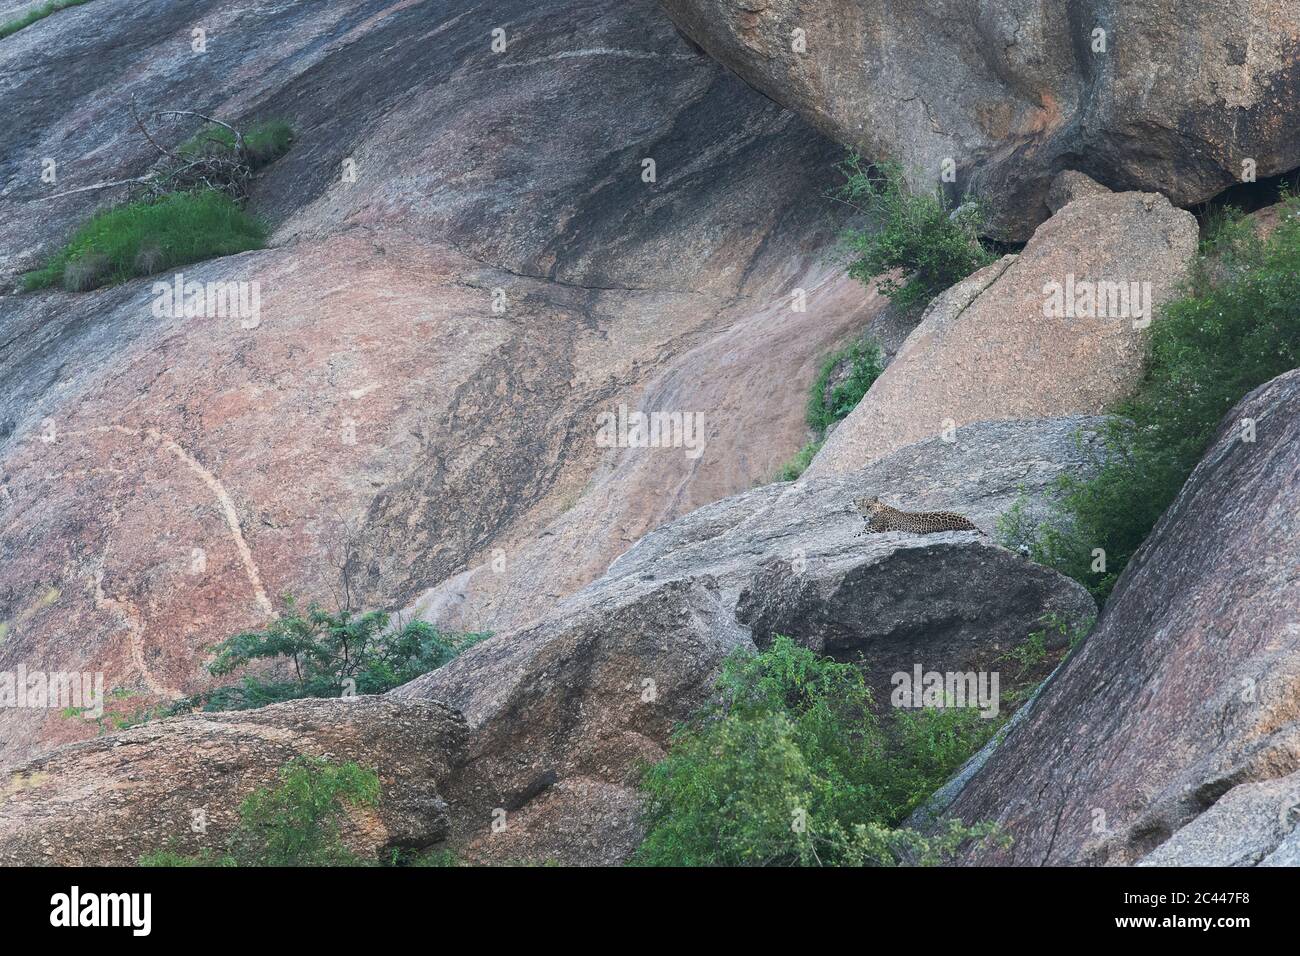 The image of Indian Leopard (Panthera Pardus Fusca ) in rocks of Jawai-Bera, Rajasthan, India, Asia Stock Photo